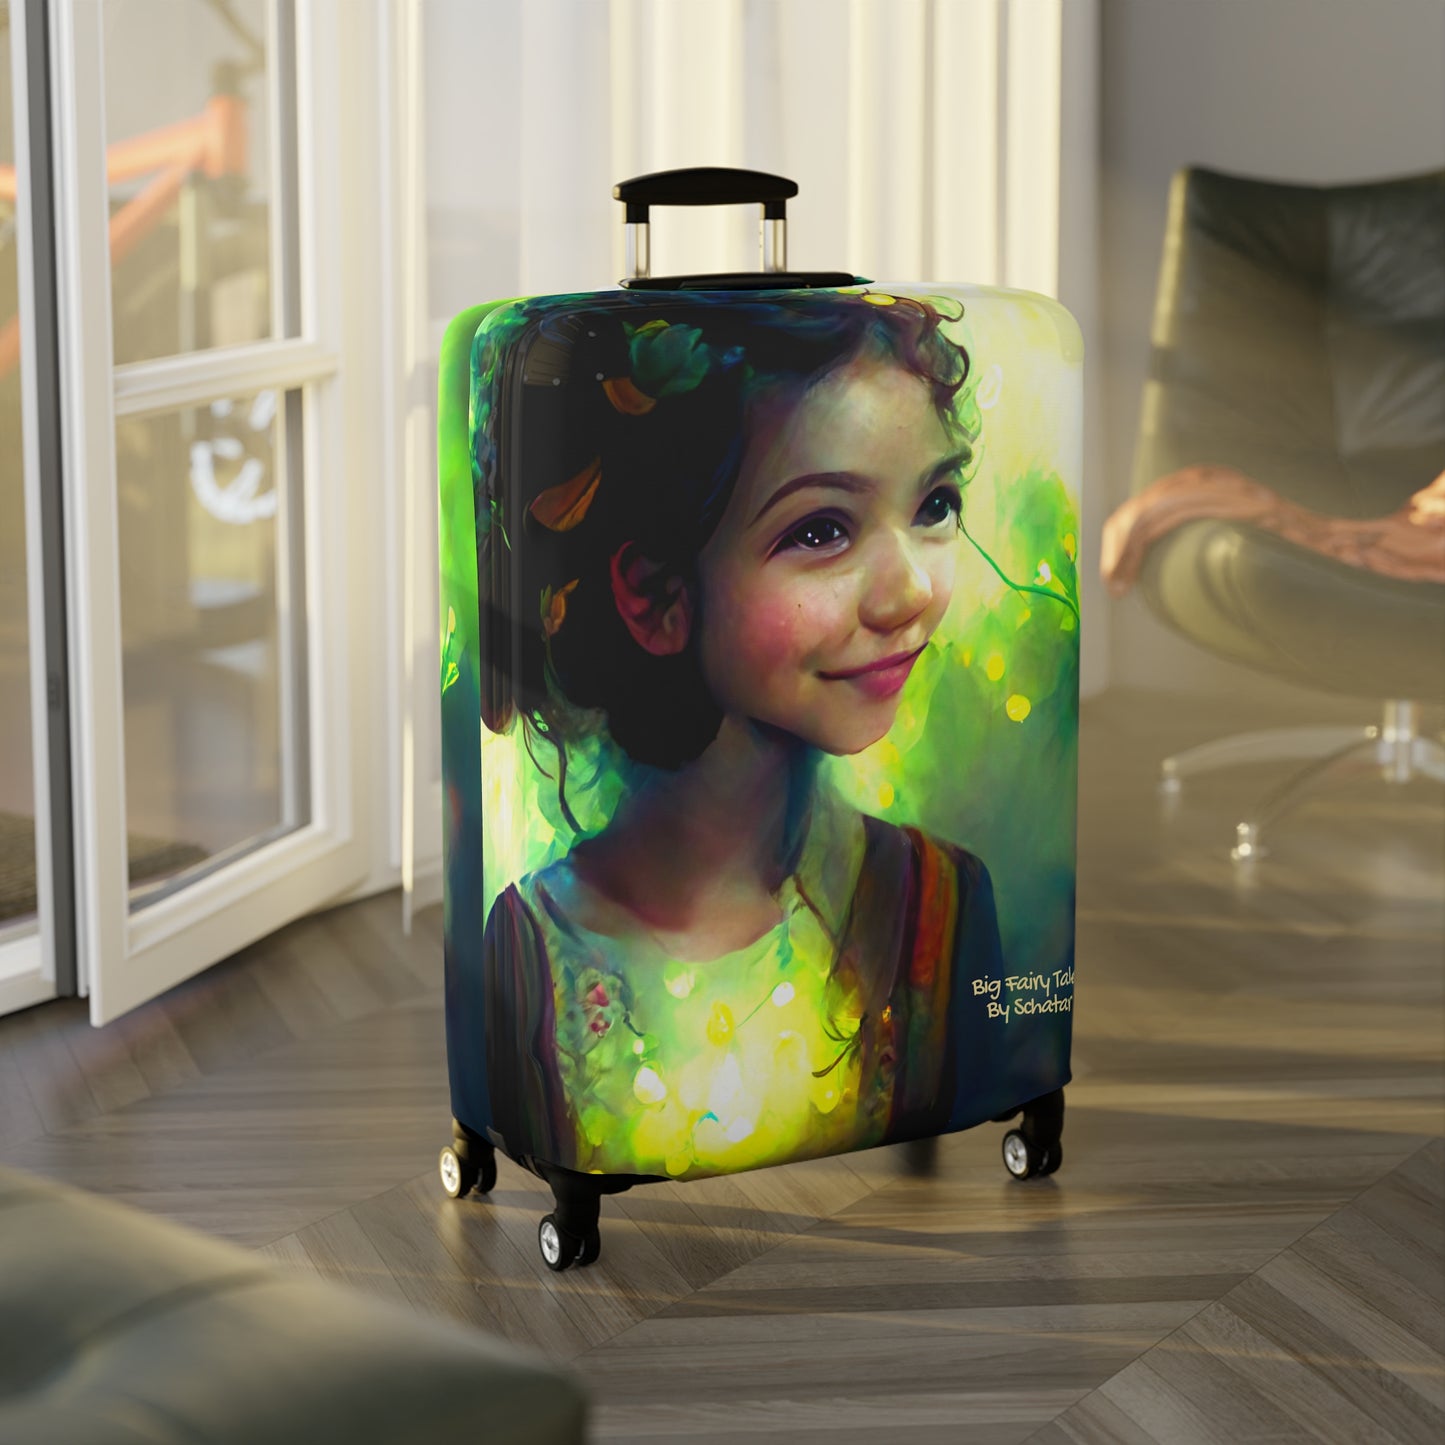 Big Fairy Tales By Jackies Beanstalk Luggage Cover